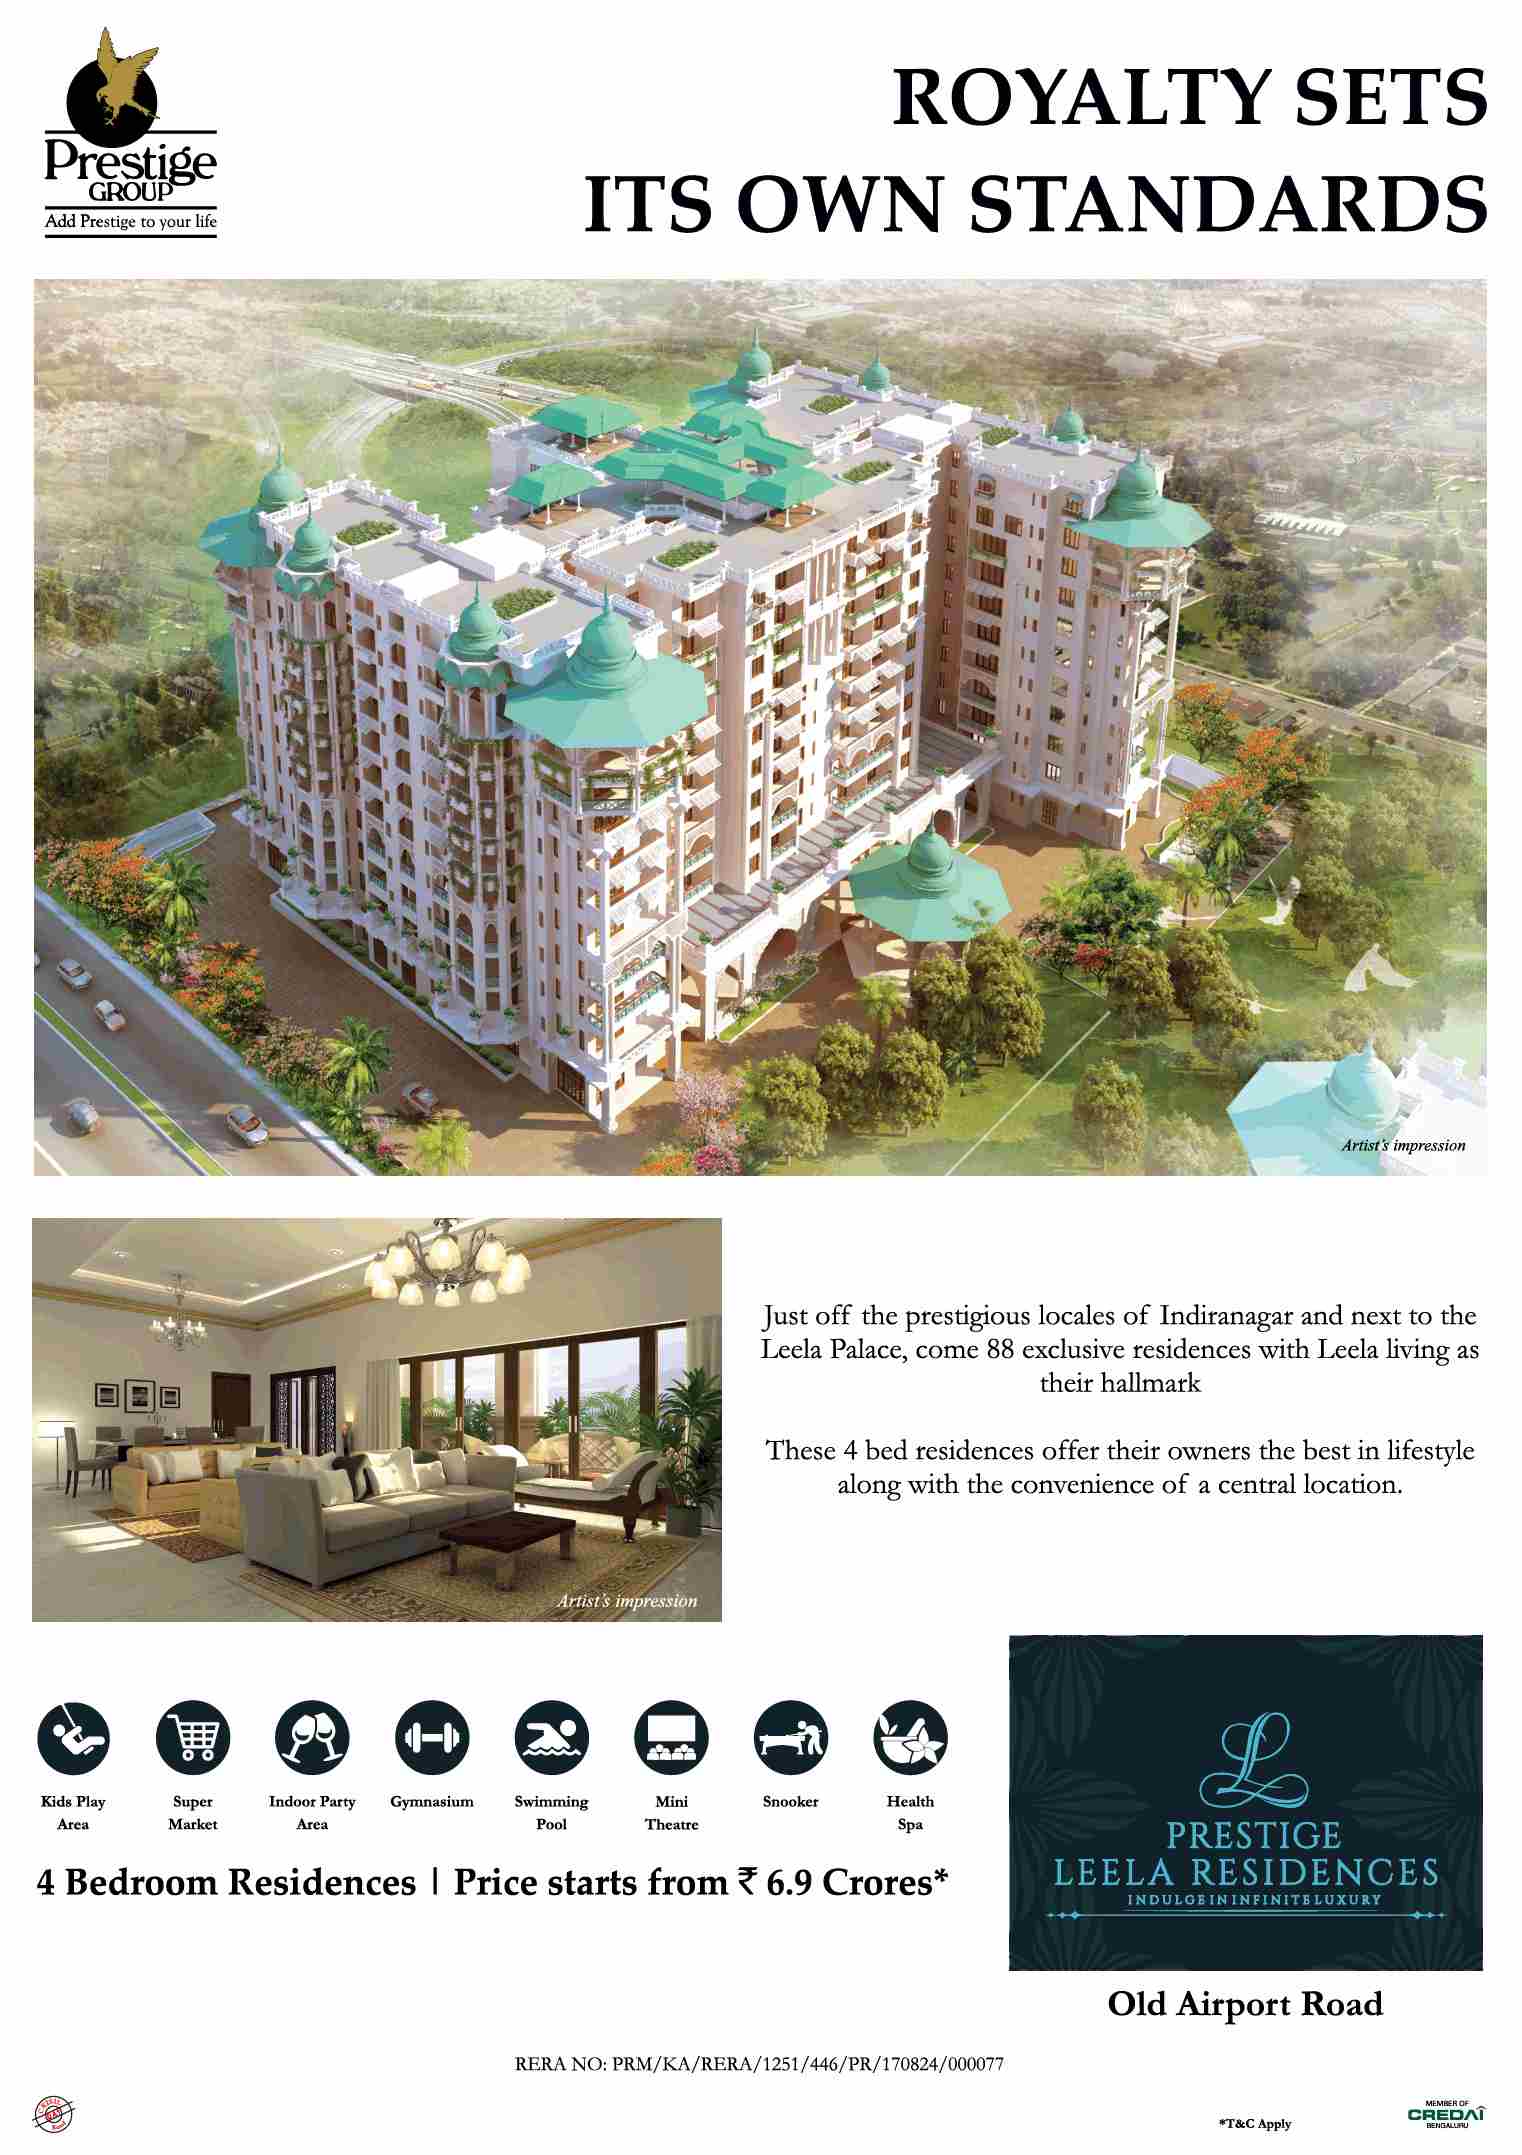 Own luxurious 4 bed residences @ Rs 6.9 cr at Prestige Leela Residences in Bangalore